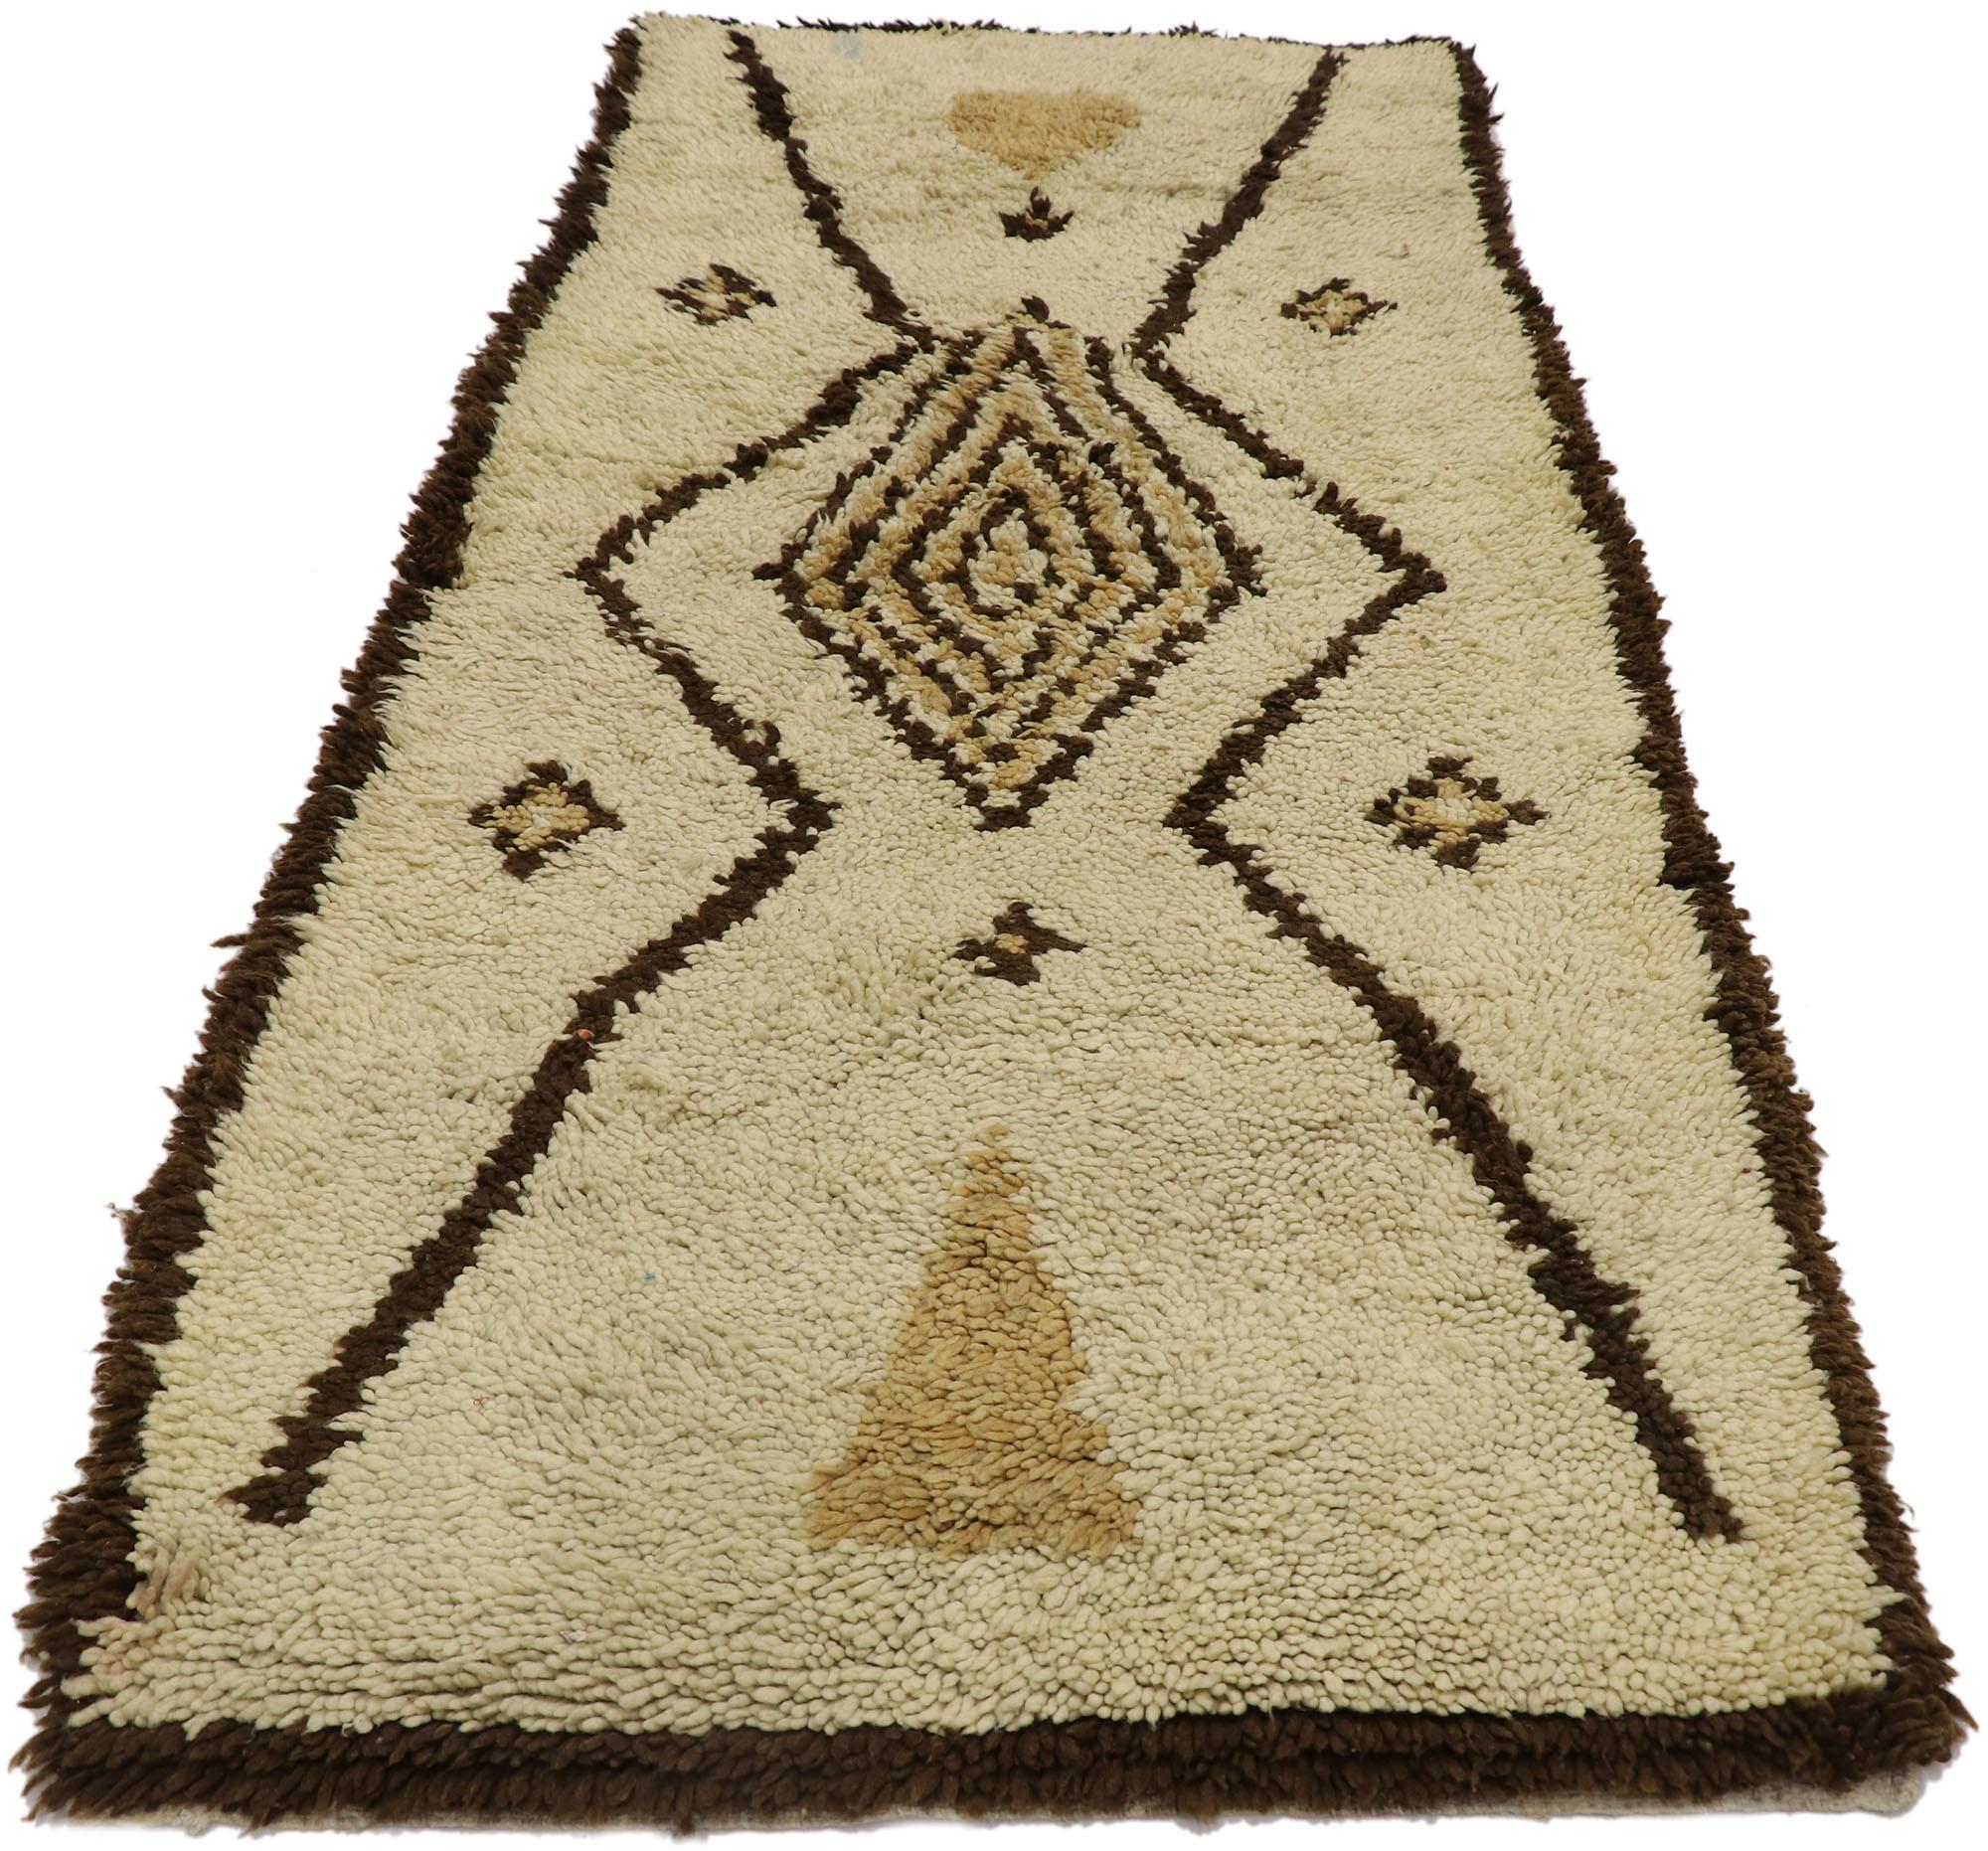 Hand-Knotted Vintage Berber Moroccan Rug with Mid-Century Modern Style